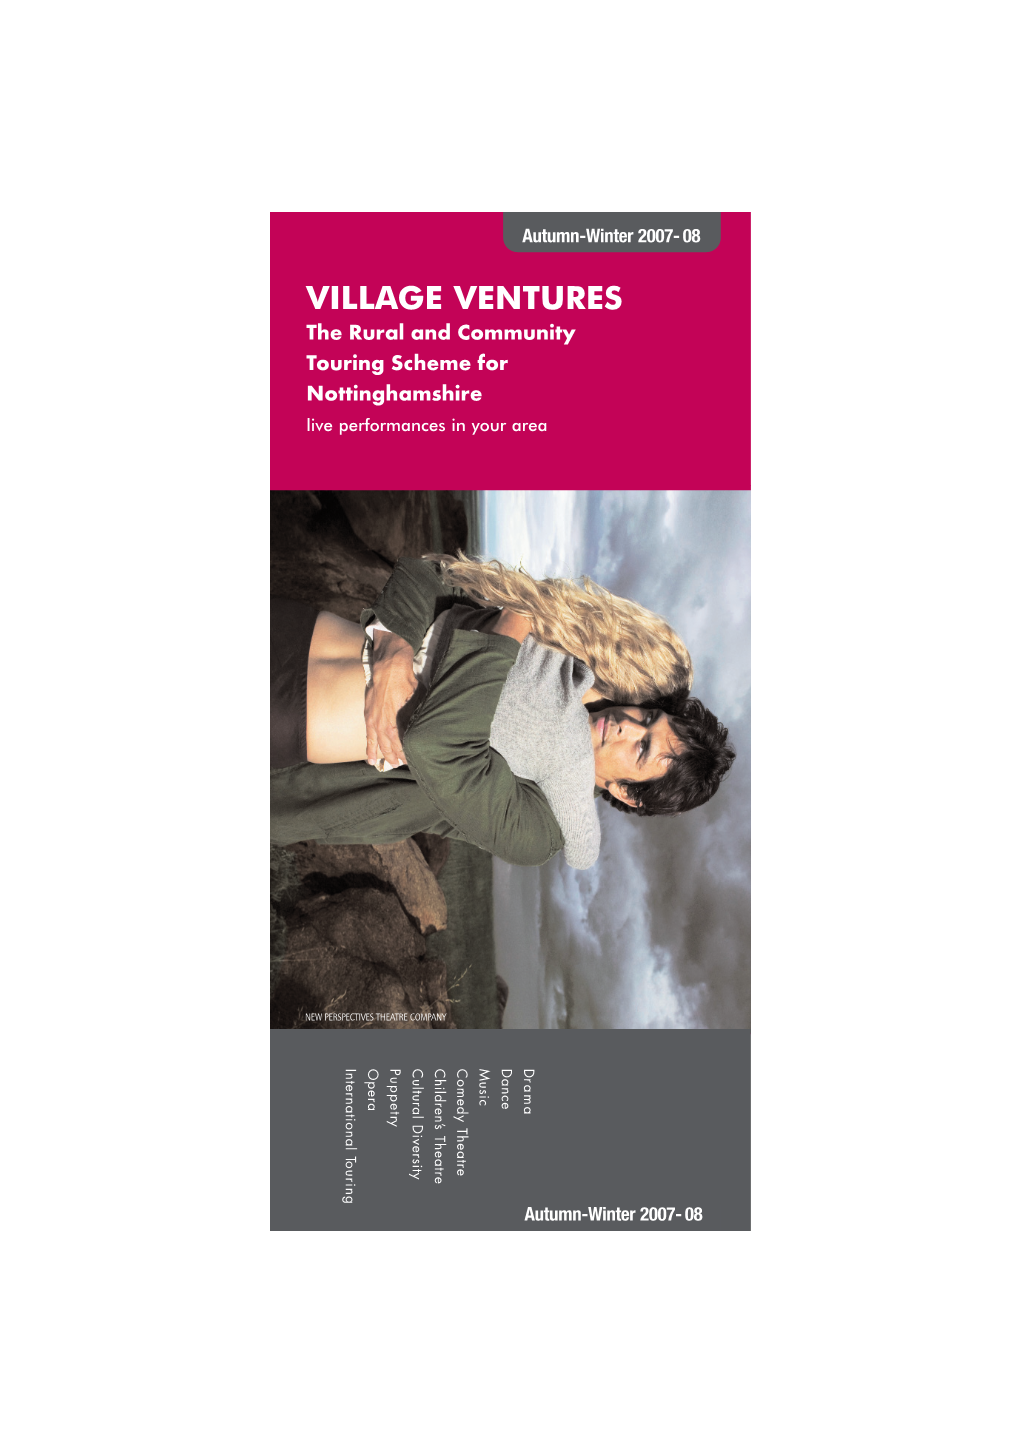 VILLAGE VENTURES the Rural and Community Touring Scheme for Nottinghamshire Live Performances in Your Area